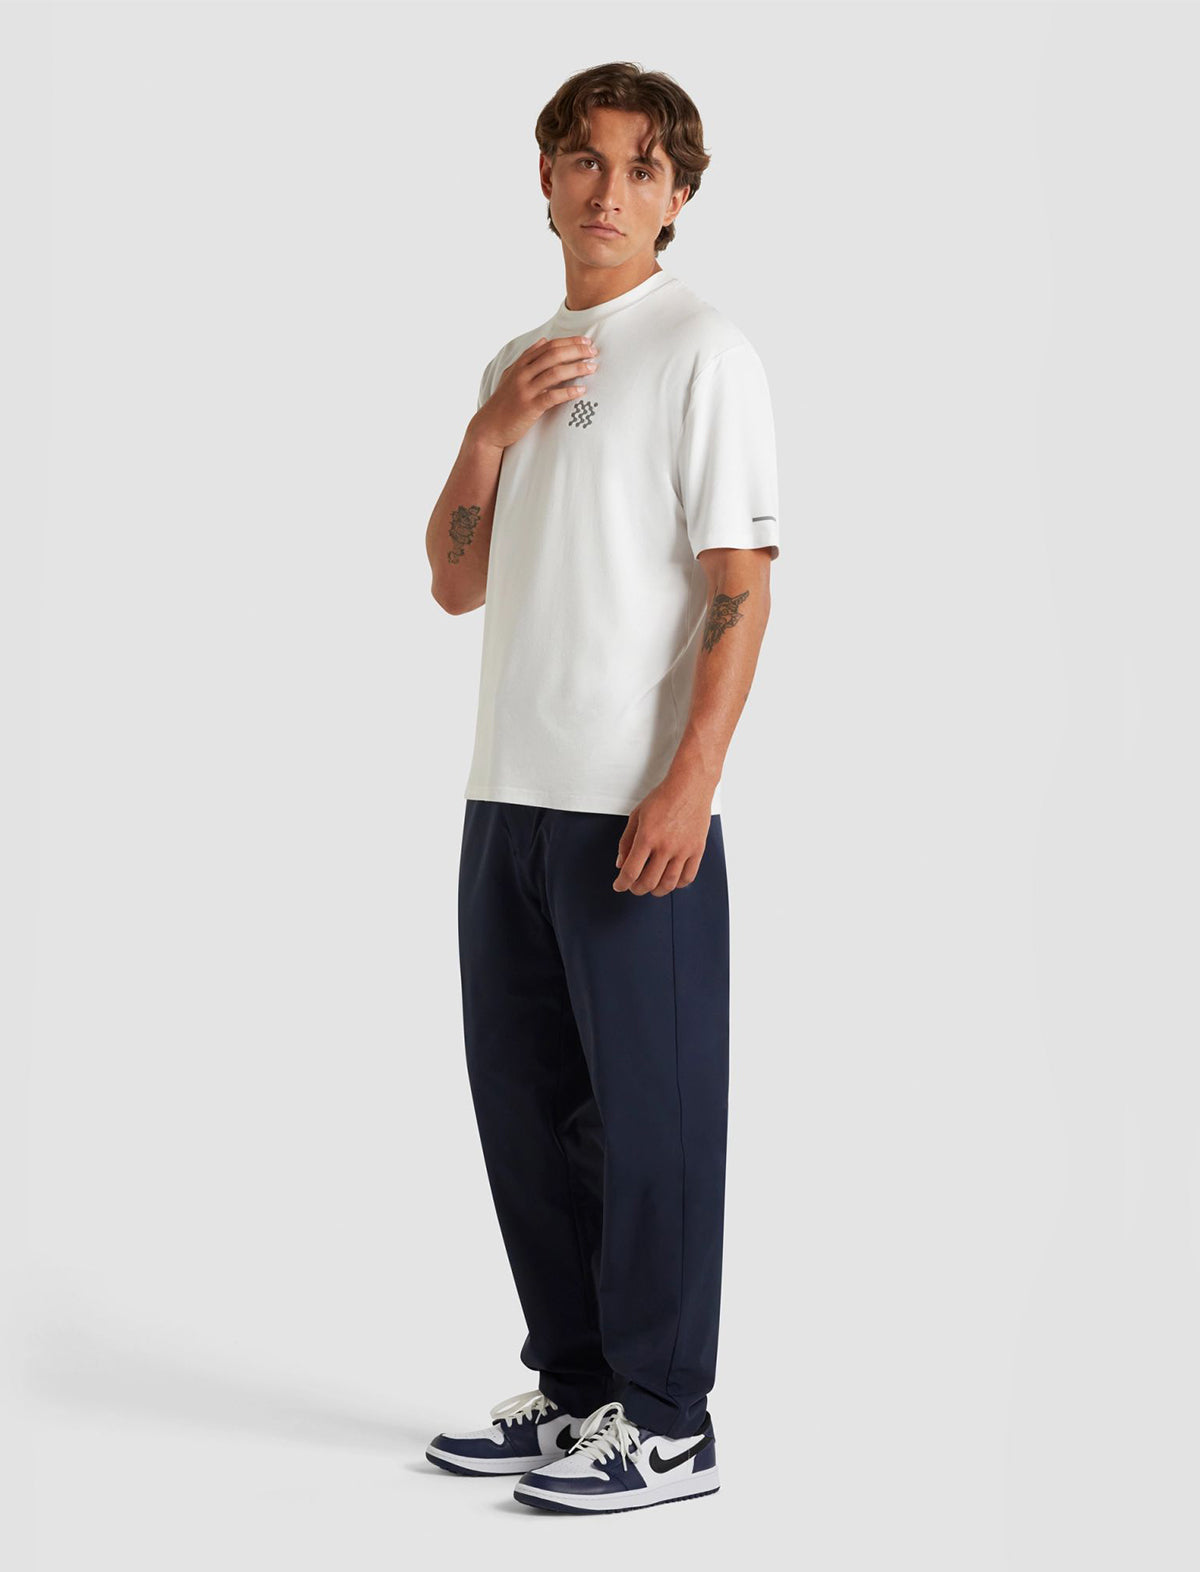 MANORS GOLF The Course Trouser in Navy